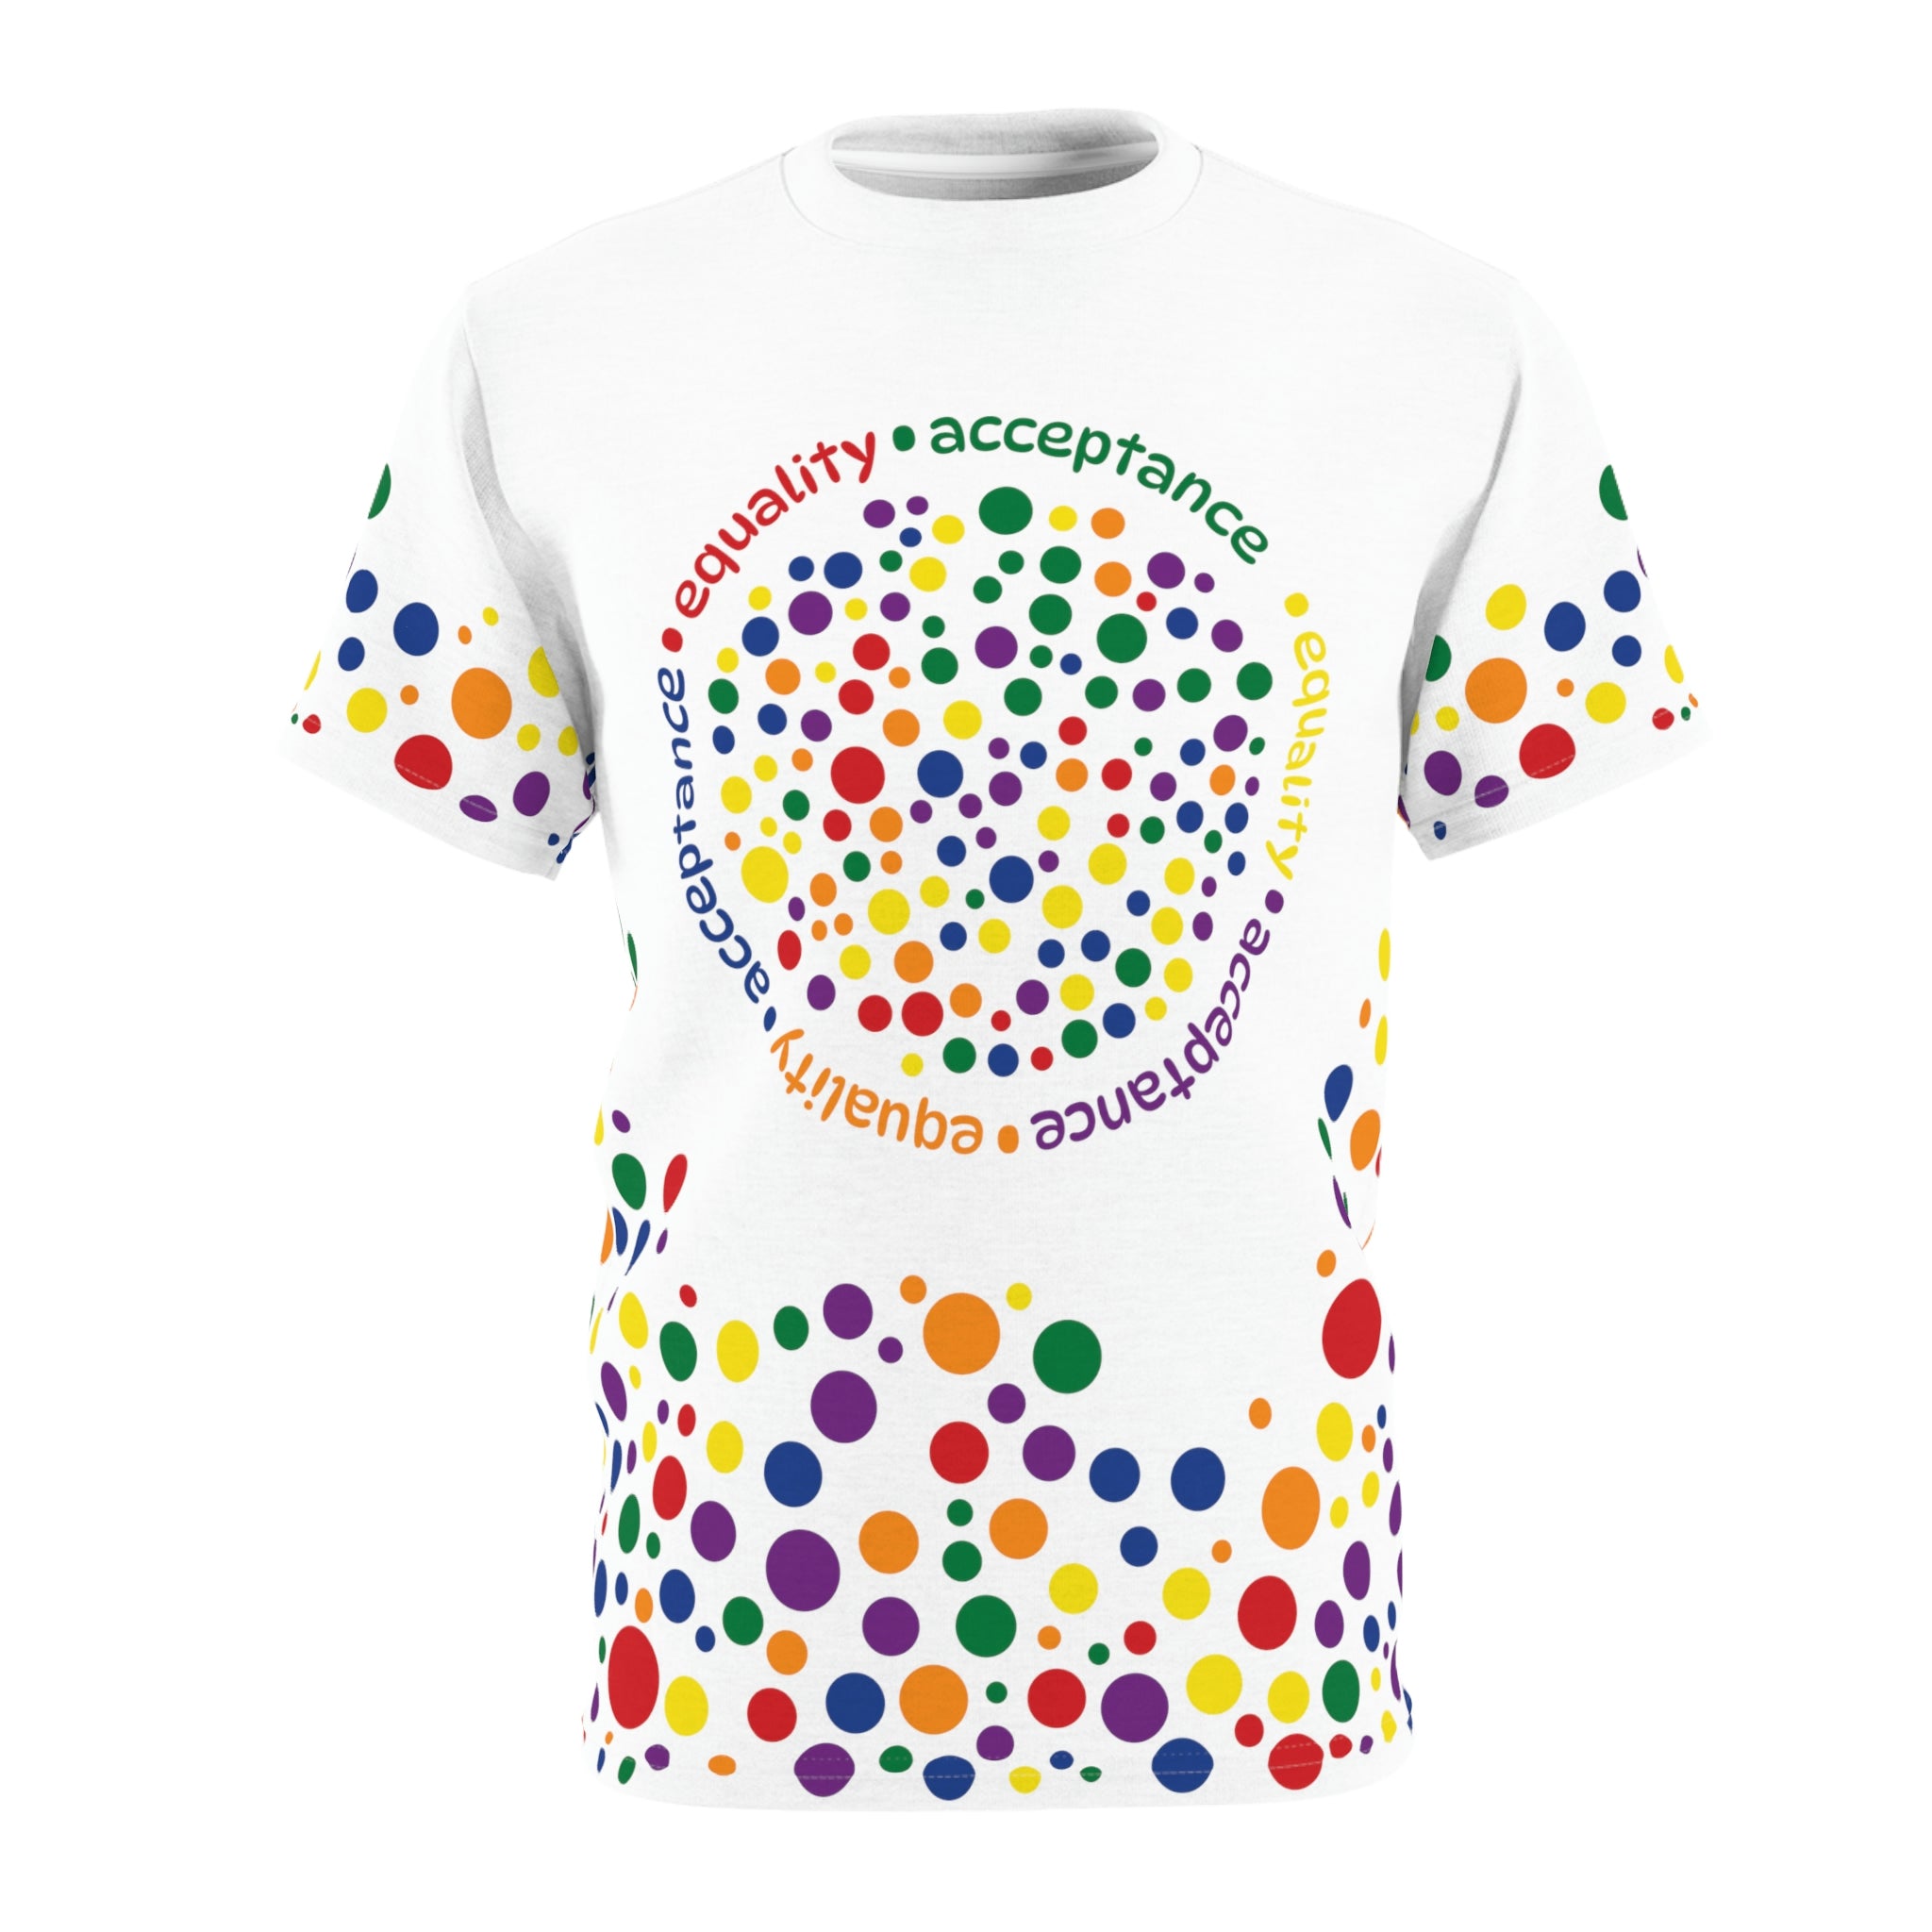 Designer Pride shirt, Special Edition - This gorgeous Unisex high quality allover print is our favoutire design!